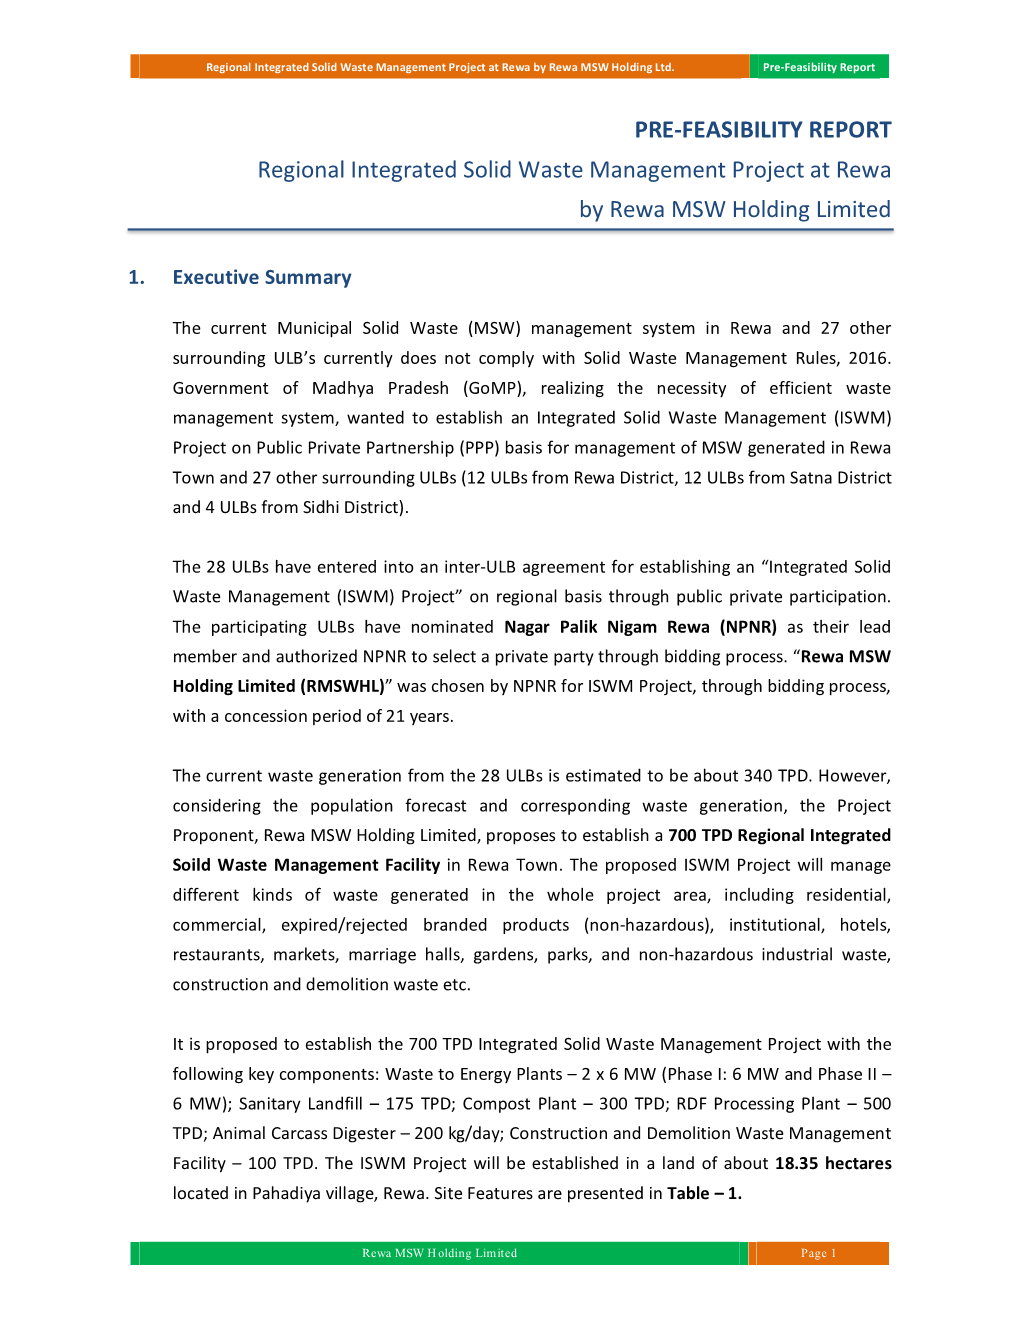 PRE-FEASIBILITY REPORT Regional Integrated Solid Waste Management Project at Rewa by Rewa MSW Holding Limited